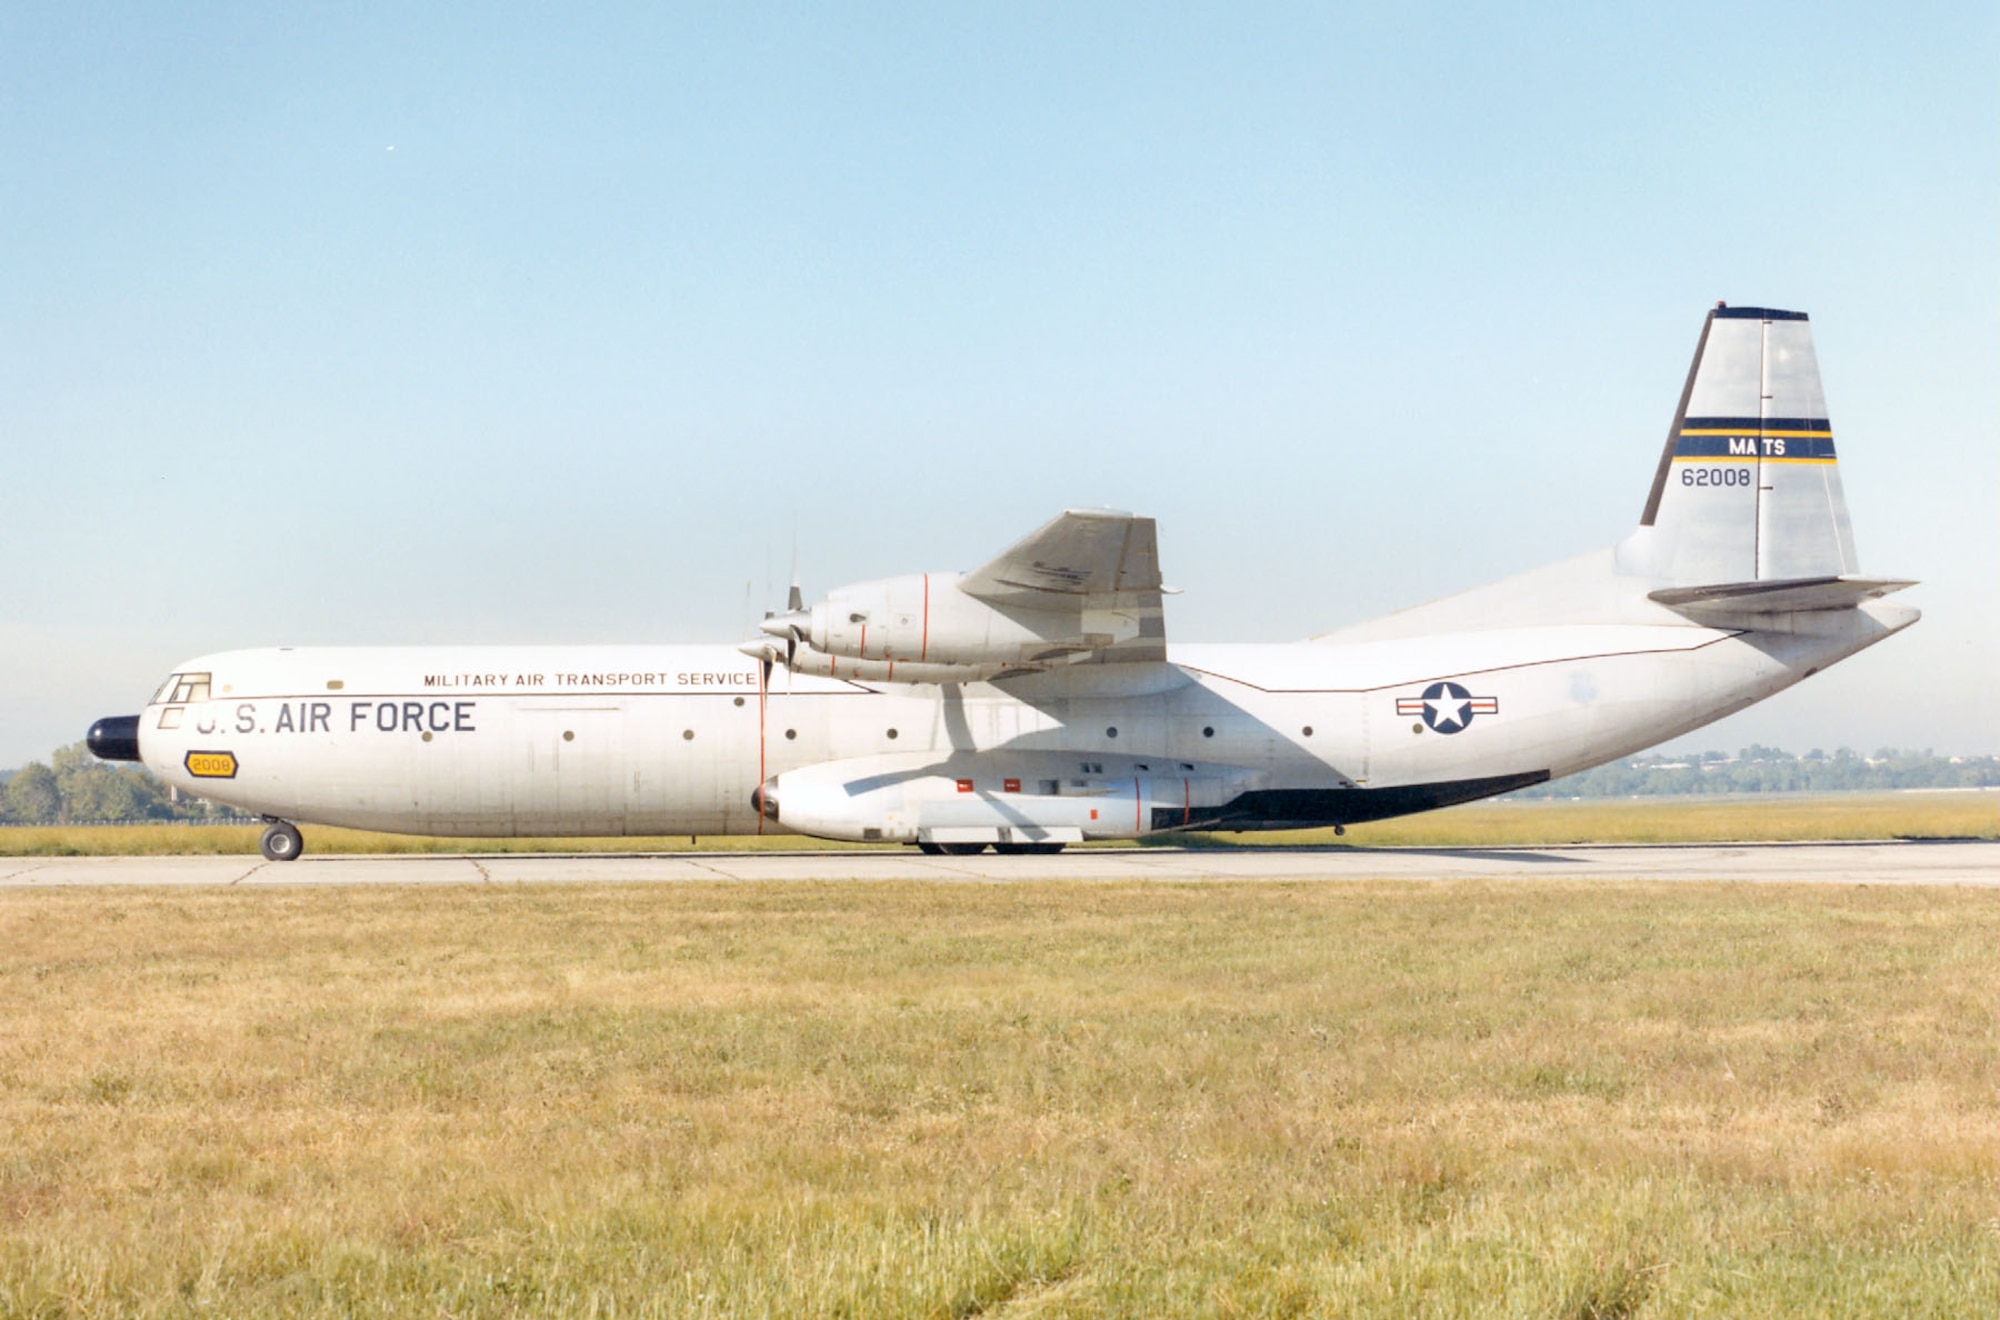 DAYTON, Ohio -- Douglas C-133A Cargomaster at the National Museum of the United States Air Force. (U.S. Air Force photo)